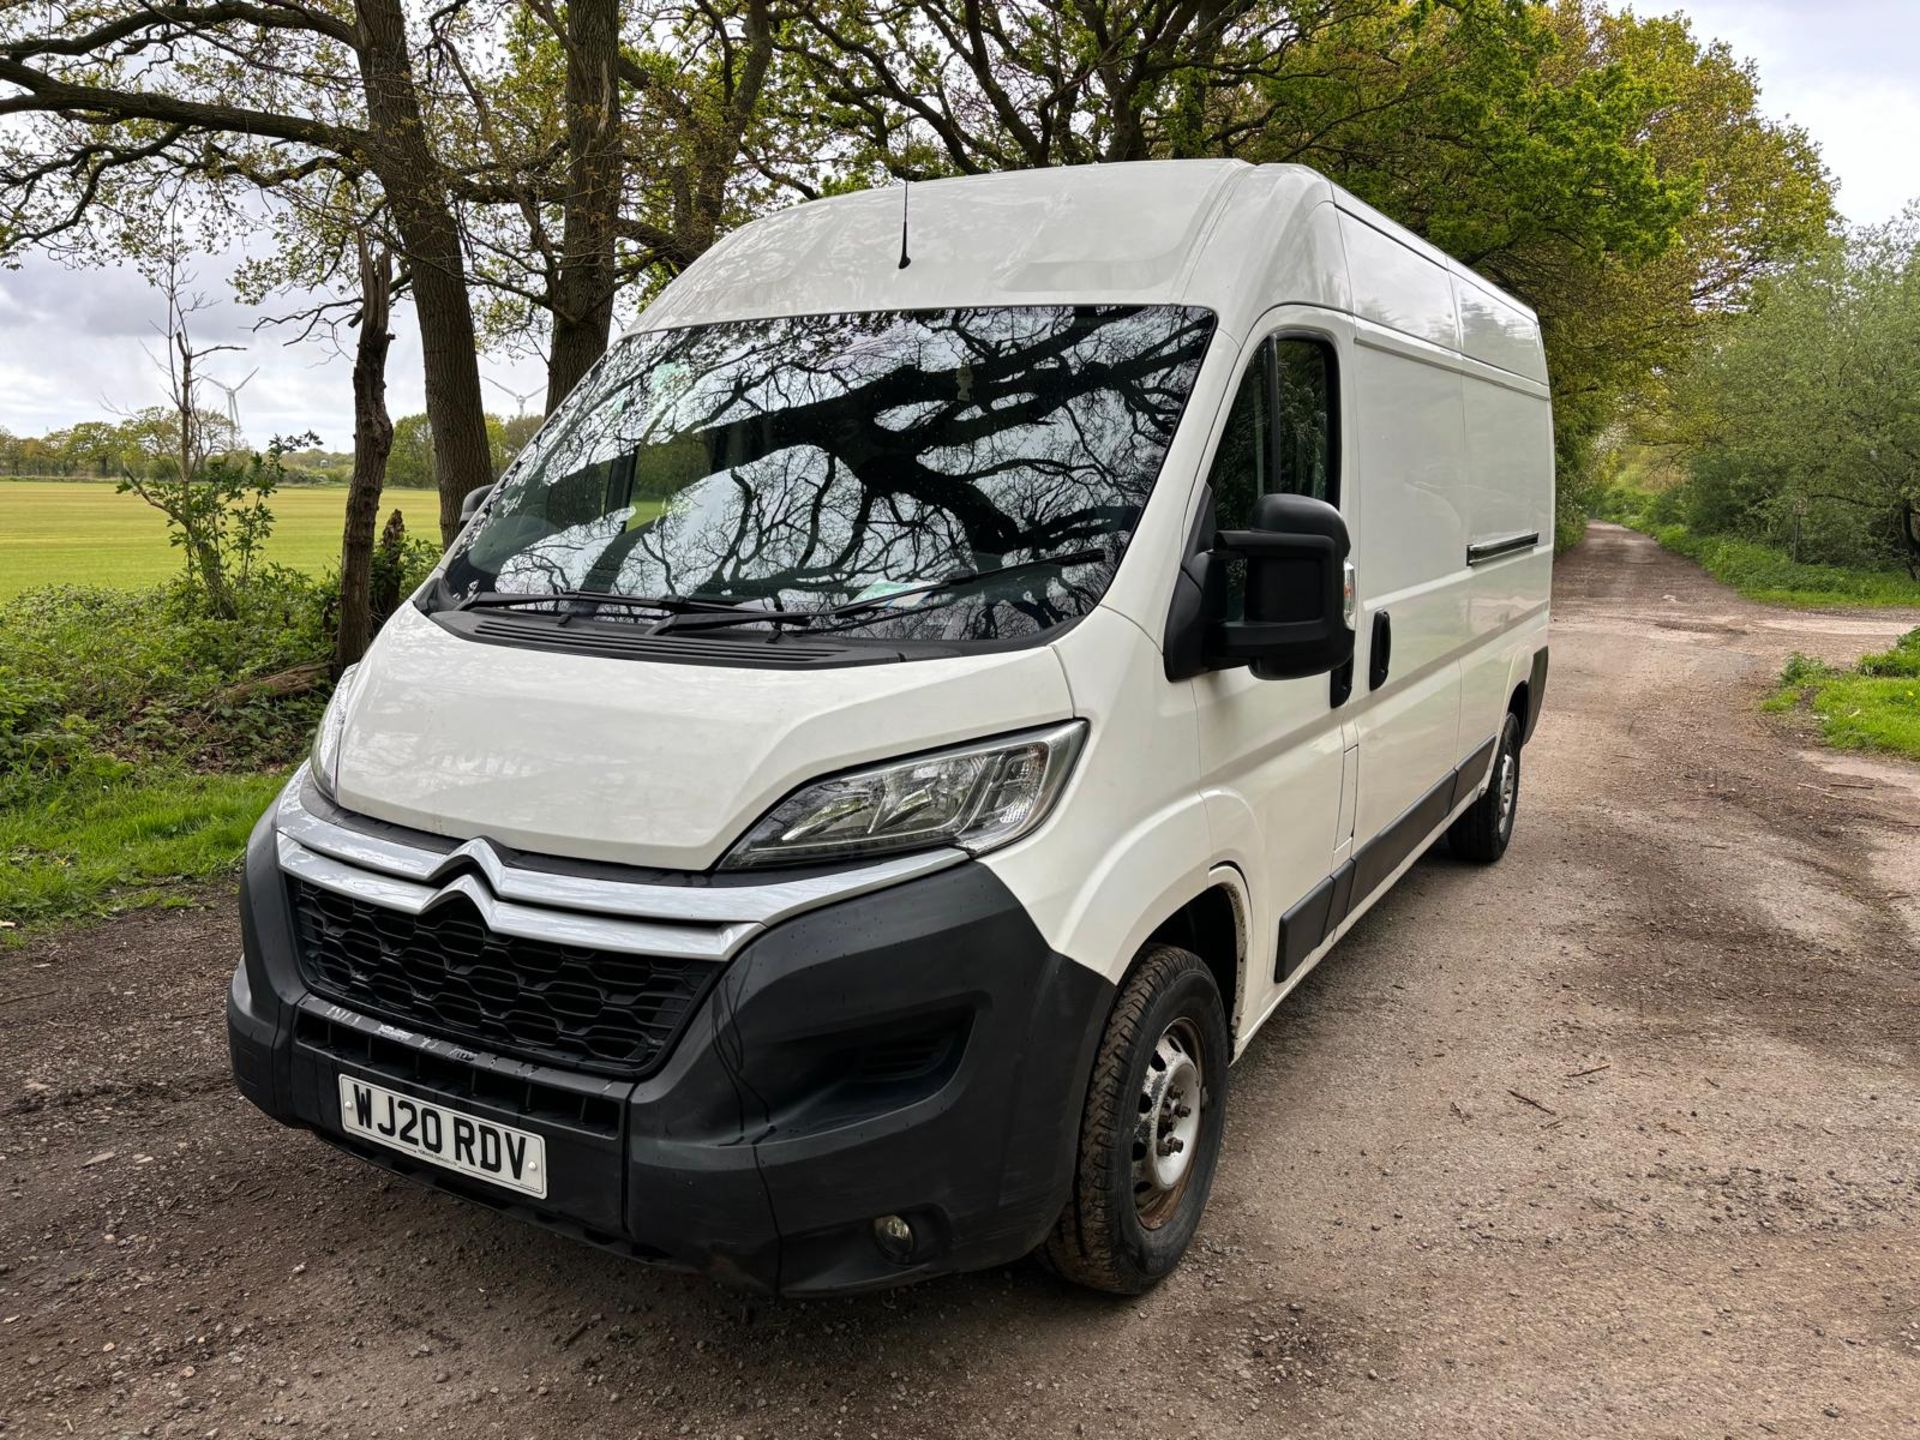 2020 20 CITROEN RELAY PANEL VAN - 2.2 6 SPEED - 109K MILES - AIR CON - EURO 6 - PLY LINED  - Image 3 of 12